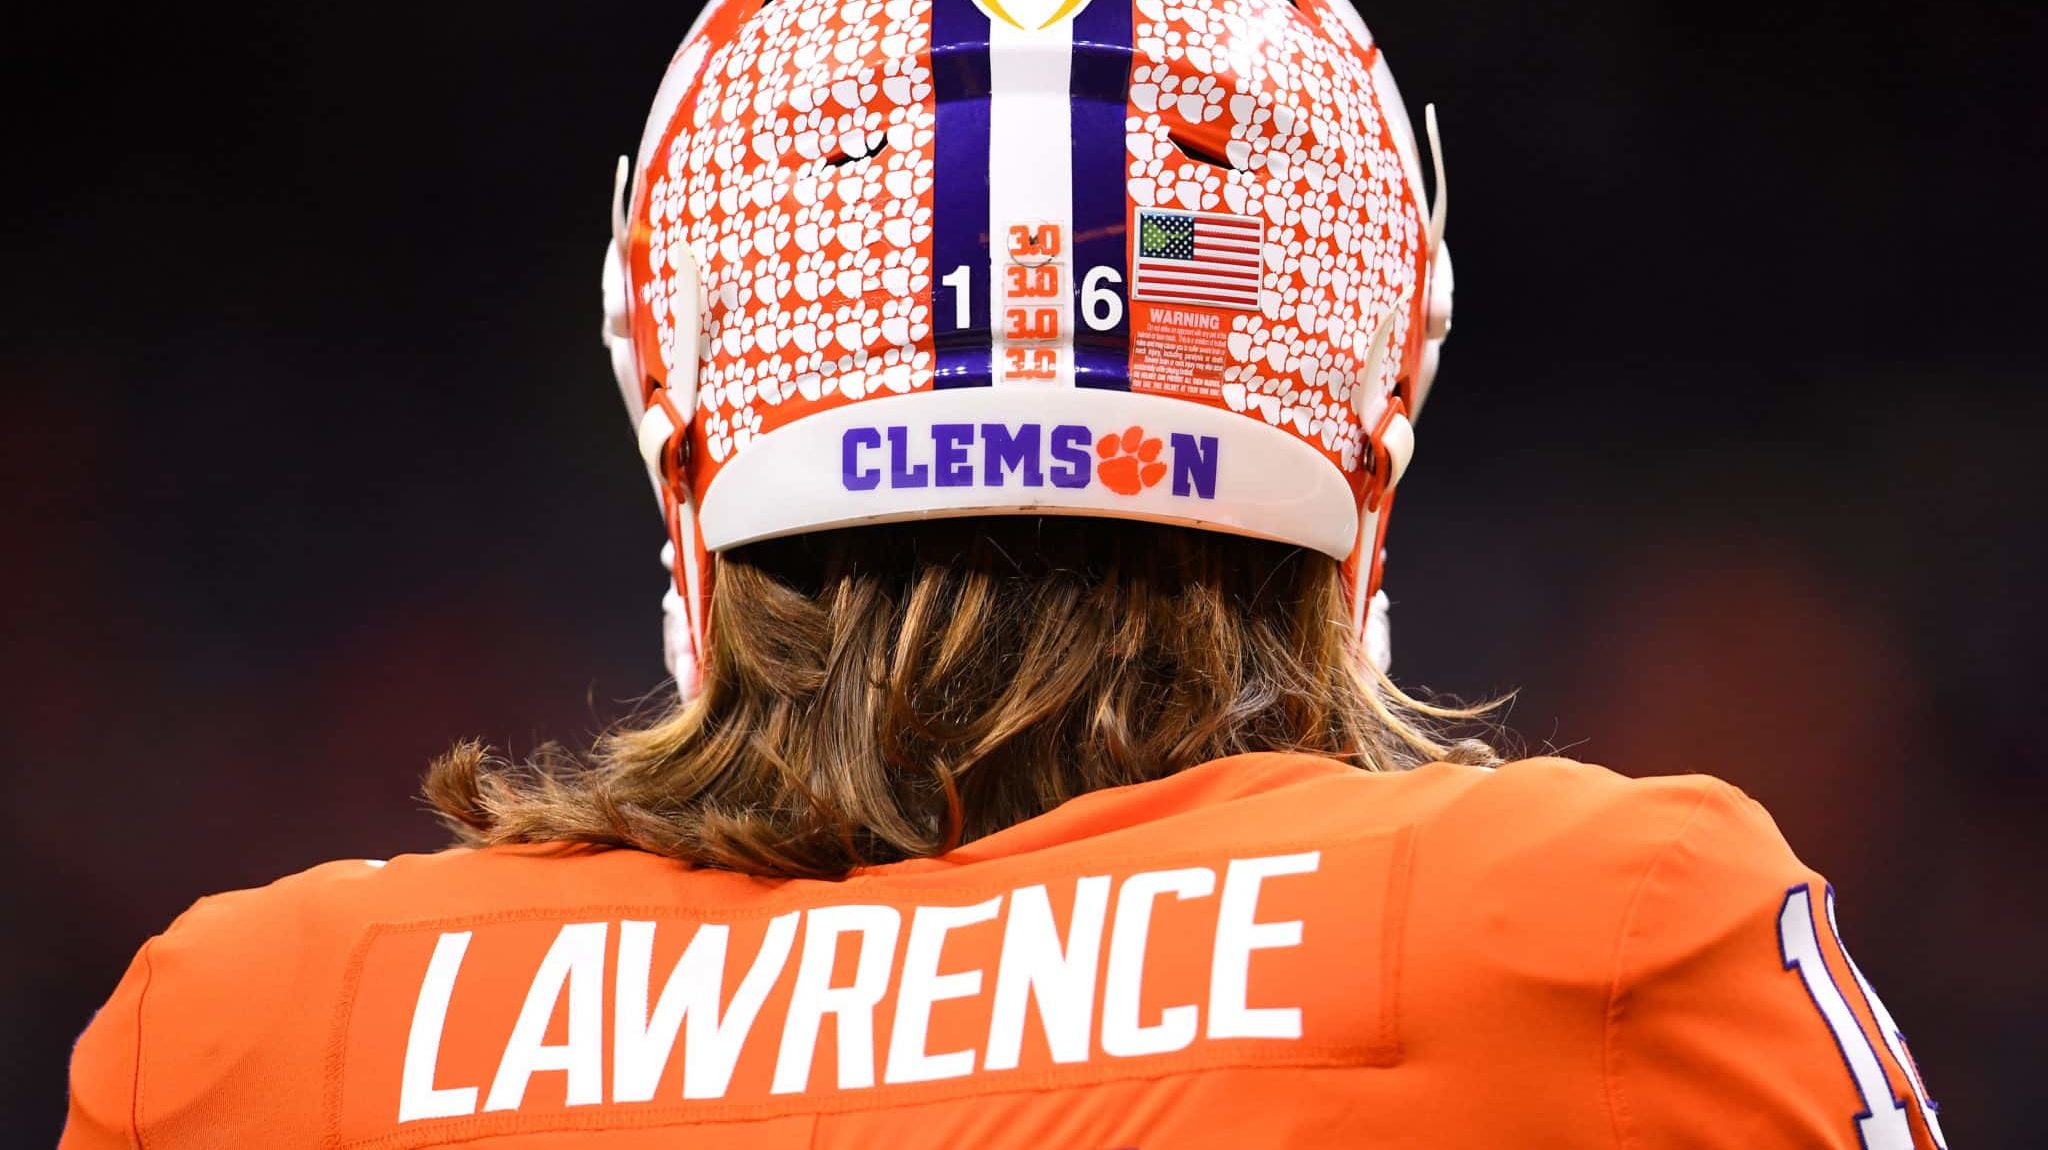 NEW ORLEANS, LA - JANUARY 13: Trevor Lawrence #16 of the Clemson Tigers before taking on the LSU Tigers during the College Football Playoff National Championship held at the Mercedes-Benz Superdome on January 13, 2020 in New Orleans, Louisiana.